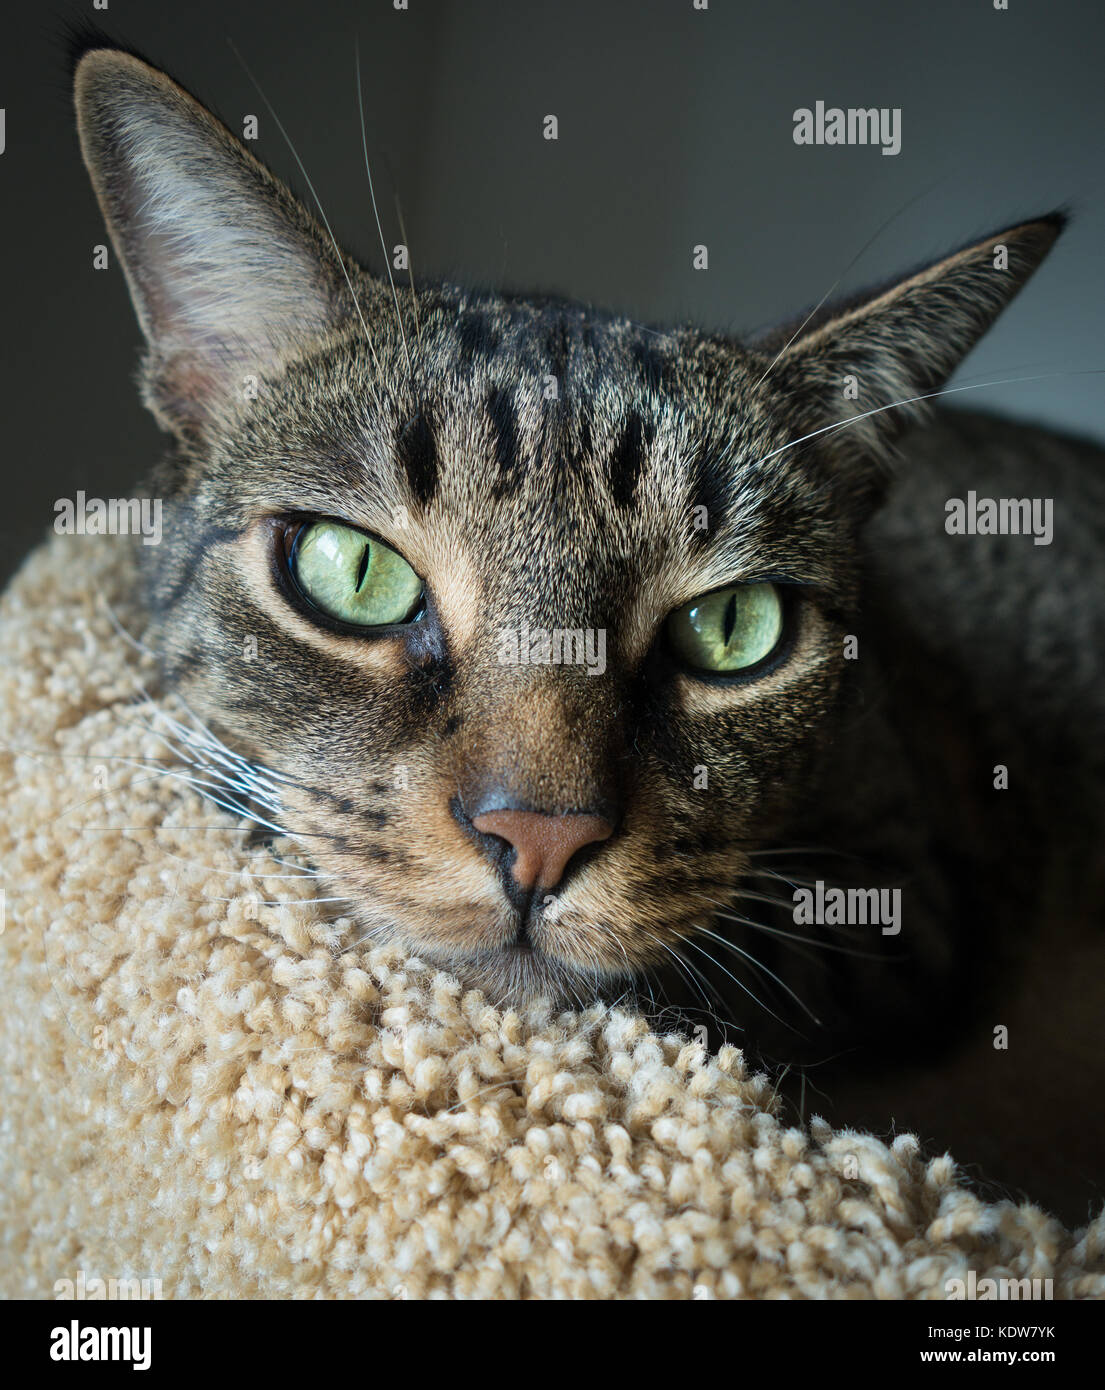 A close up of a black and grey tiger striped tabby cat with green eyes, looking at the camera Stock Photo